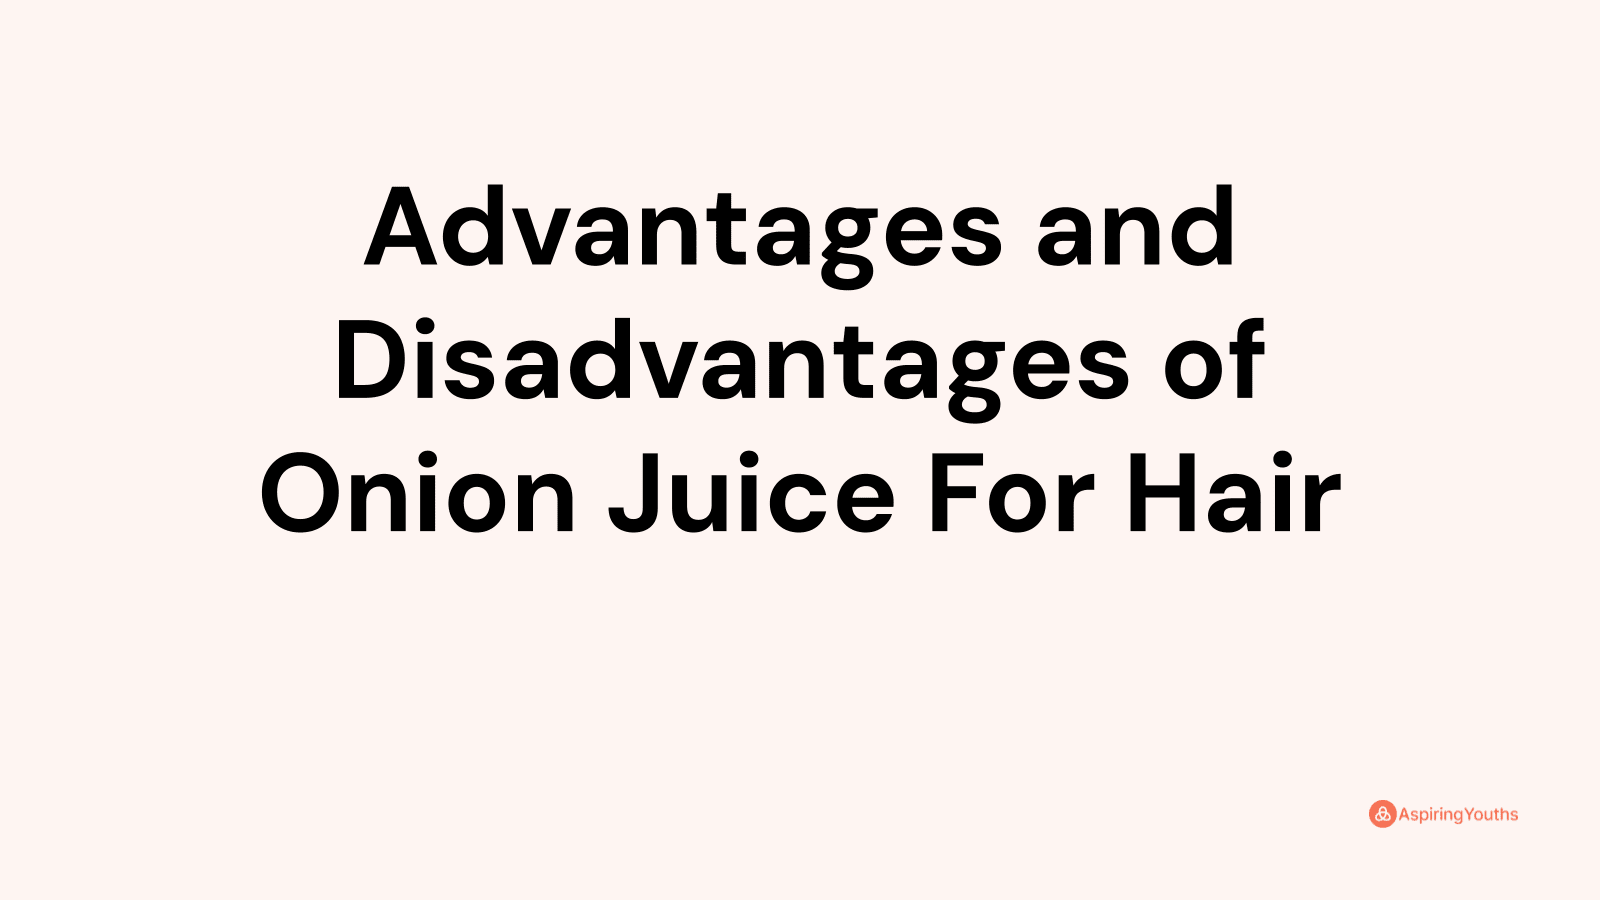 Advantages and disadvantages of Onion Juice For Hair